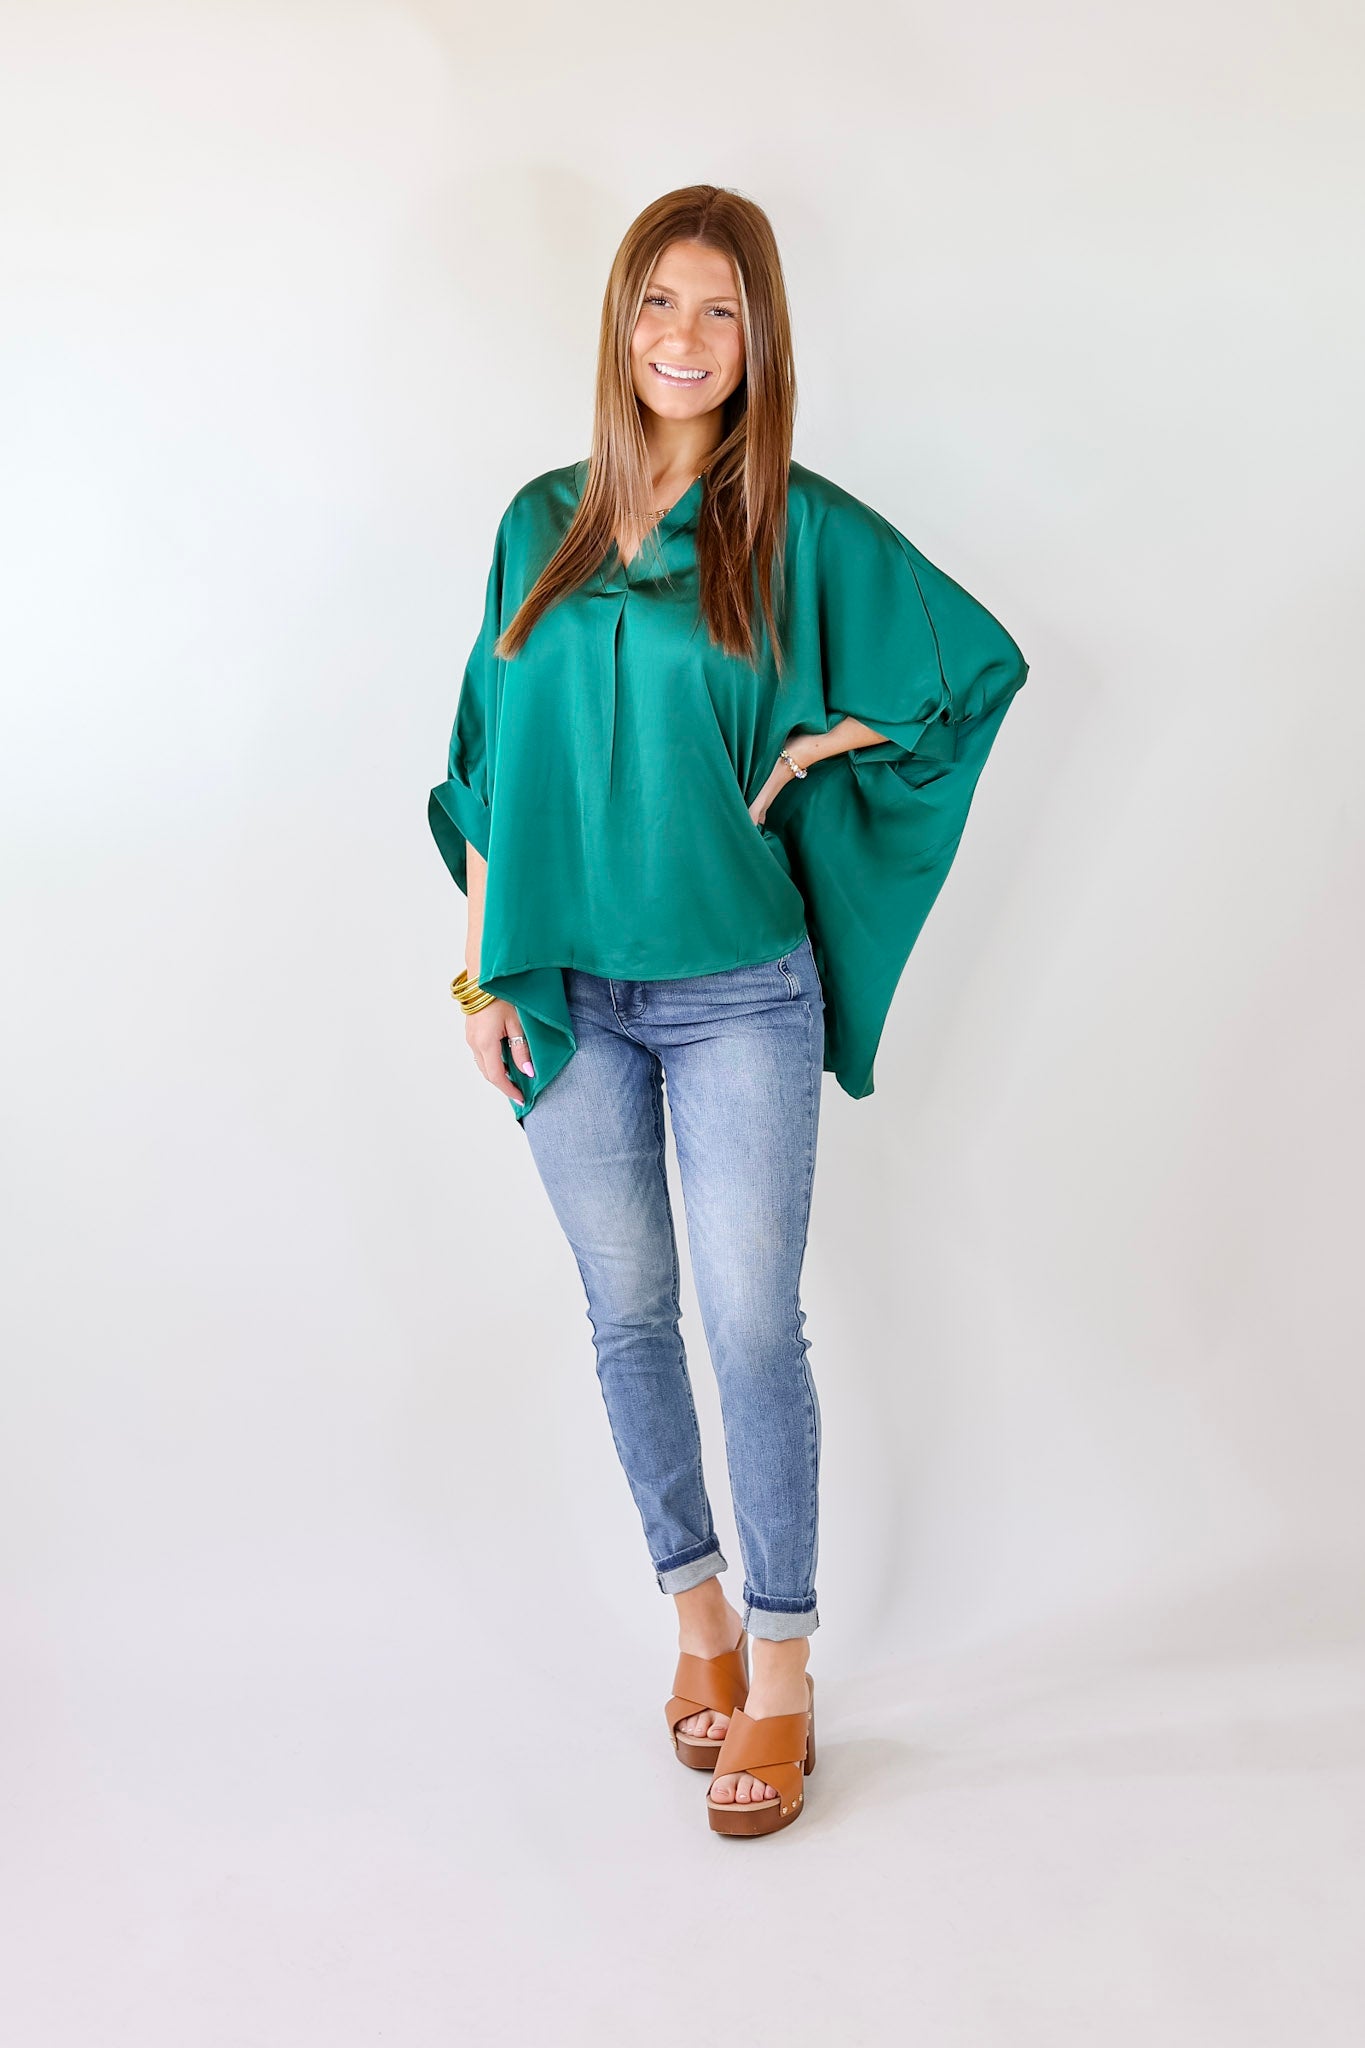 Irresistibly Chic Half Sleeve Oversized Blouse in Hunter Green - Giddy Up Glamour Boutique